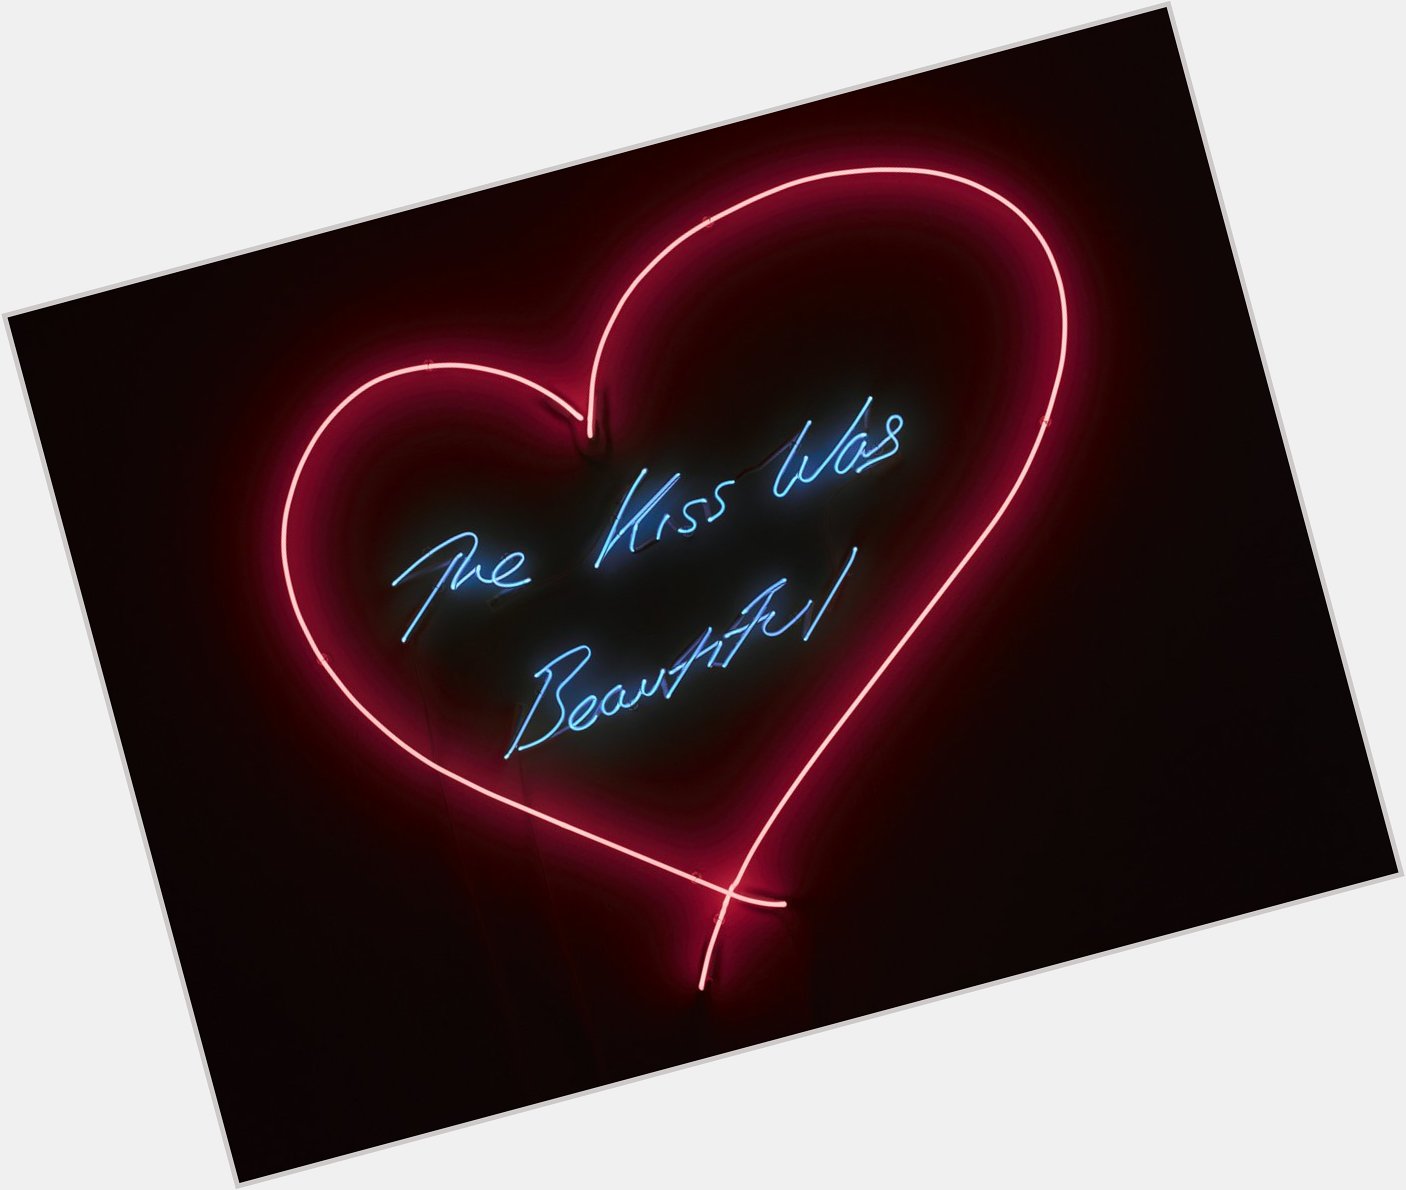 Happy Birthday to one of the Young British Artists, Tracey Emin:  